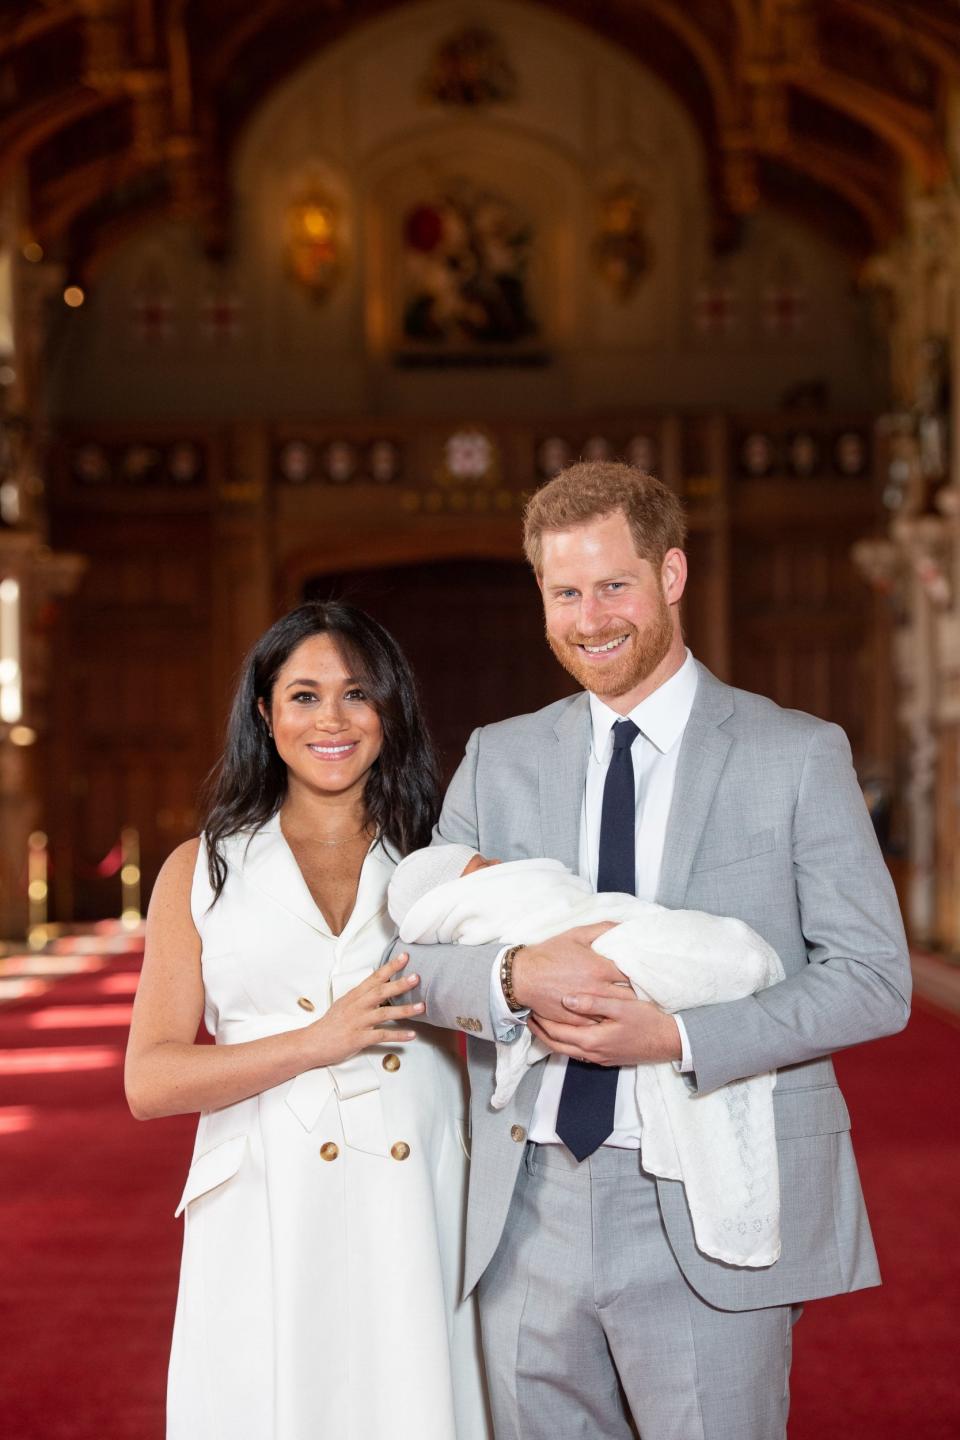 Archie Harrison Mountbatten-Windsor revealed as royal baby name by Meghan Markle and Prince Harry